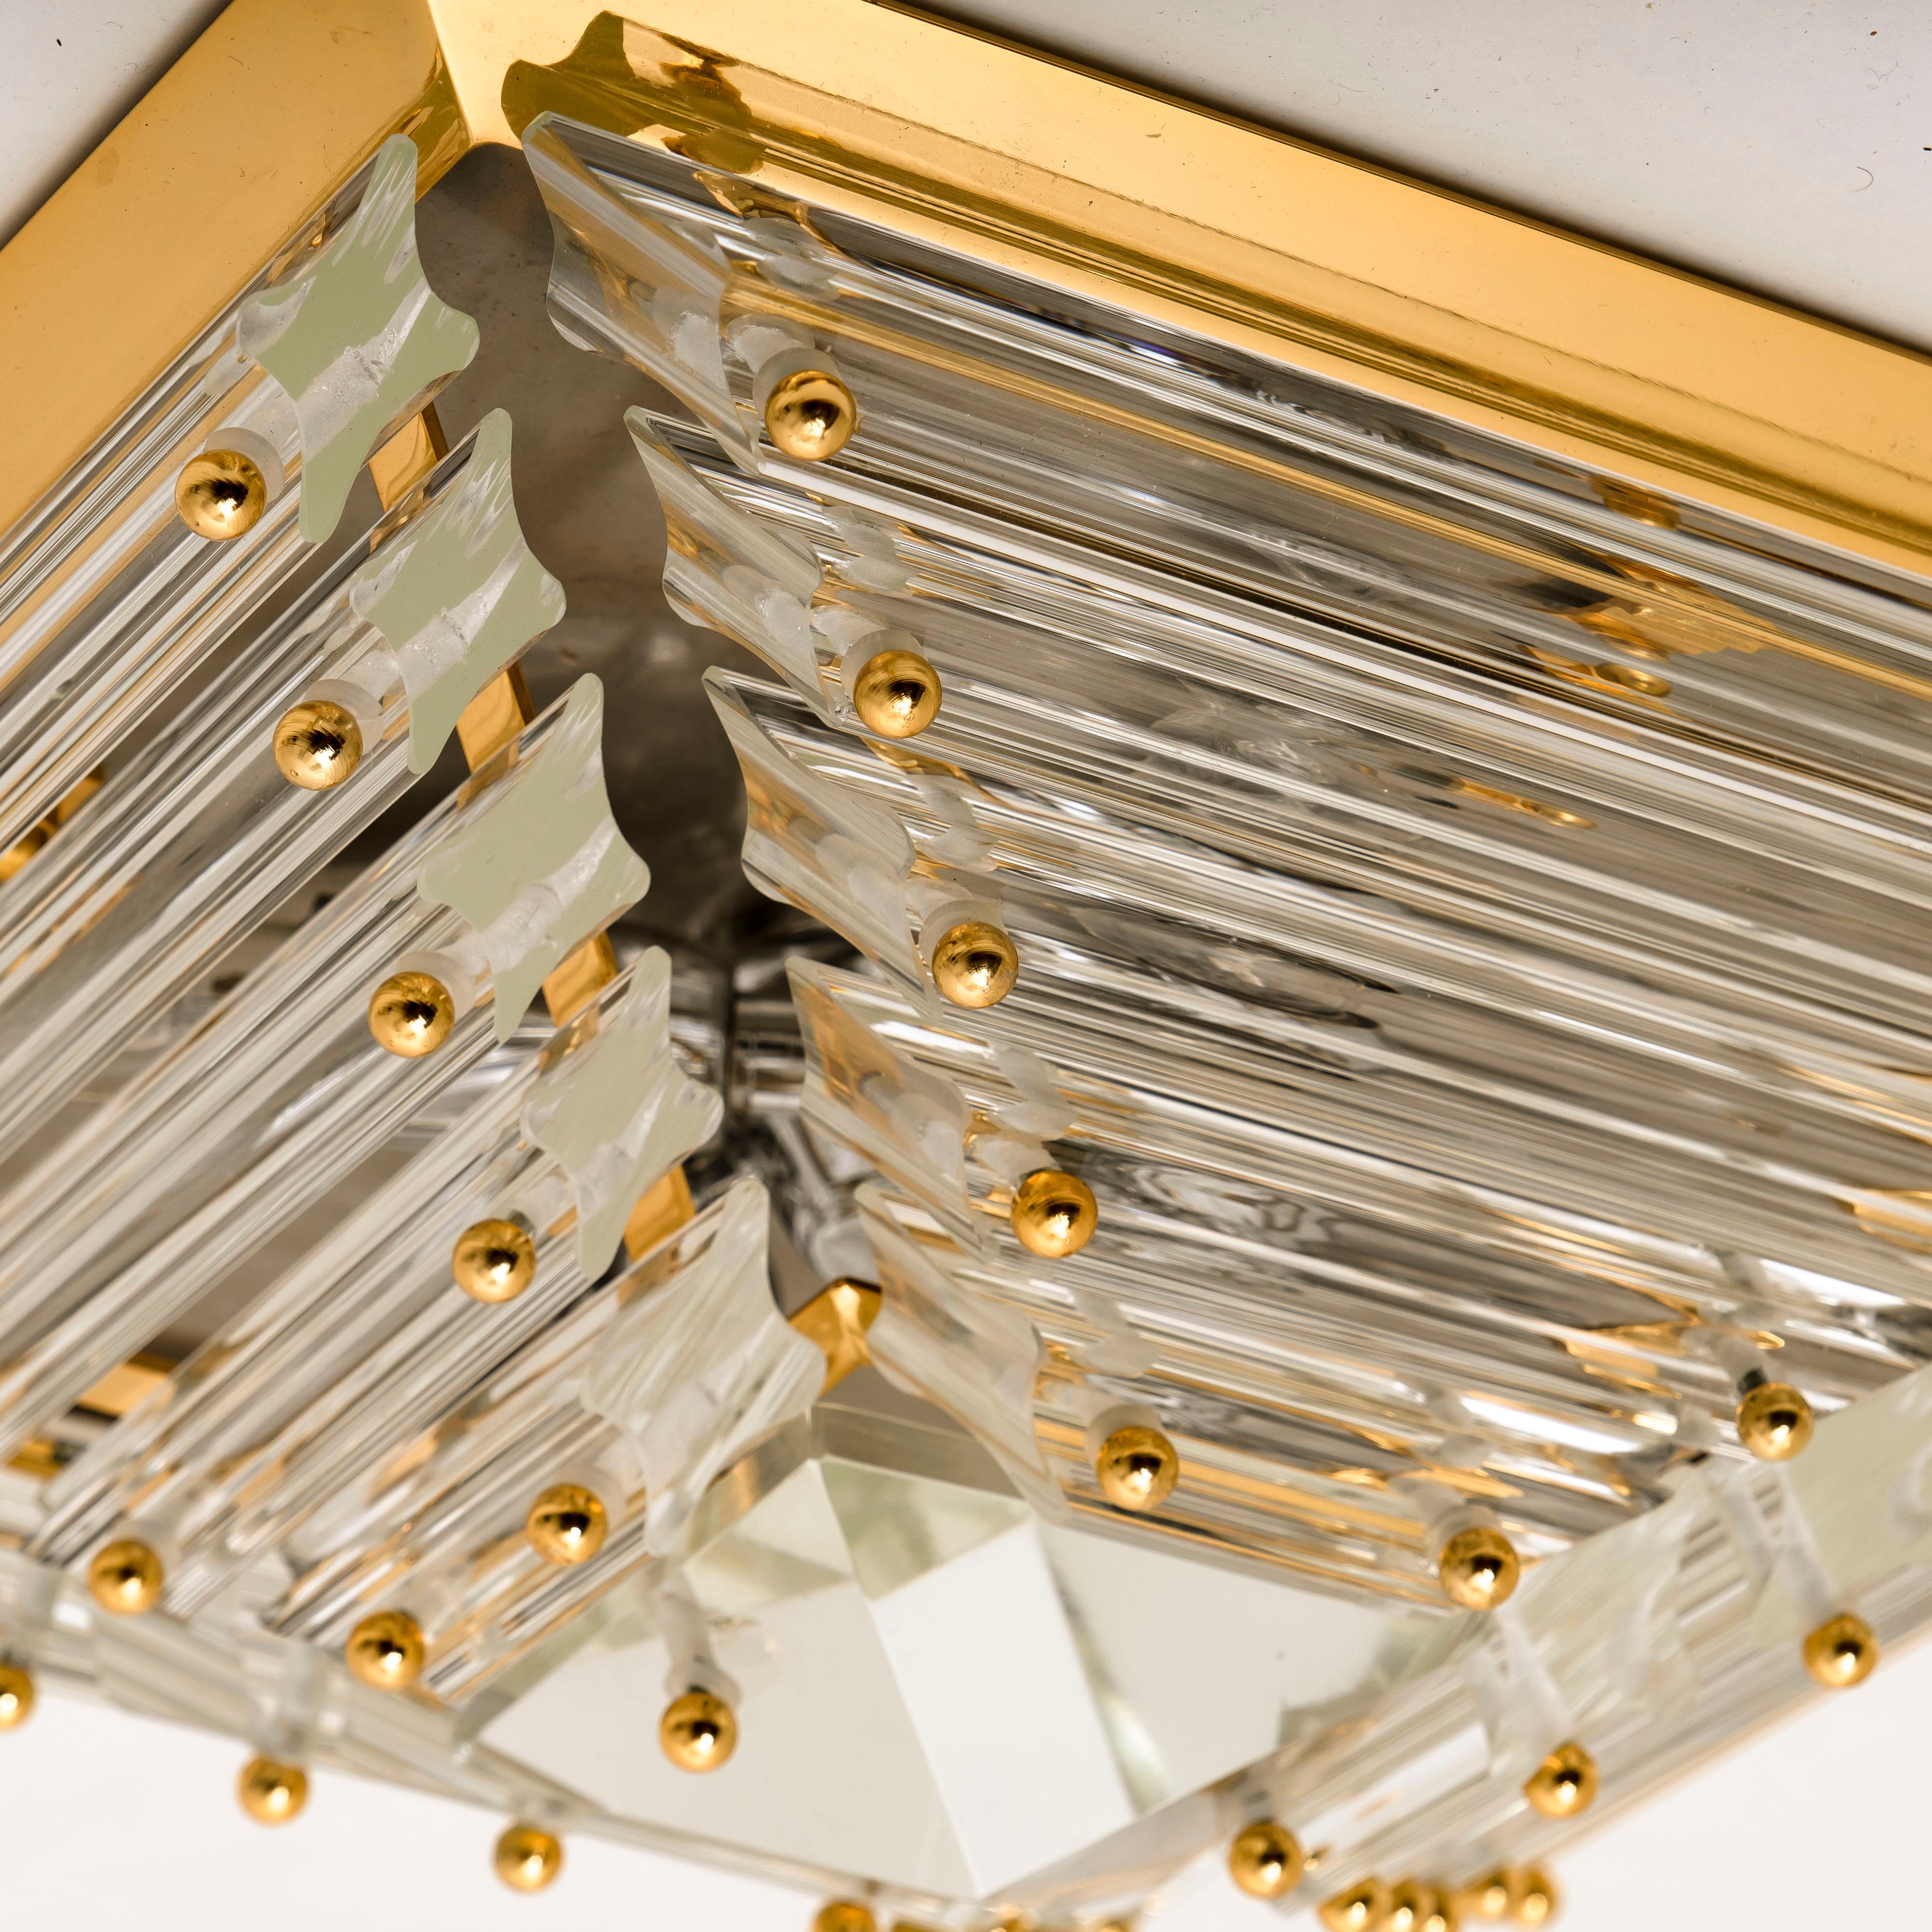 An exceptional set of three gold-plated Venini flush mounts with faceted clear crystal tubes of Murano glass. Modulated in the form of a pyramid. The flush mounts are designed and produced by Venini in Italy from the 1970s. The Murano tubes are